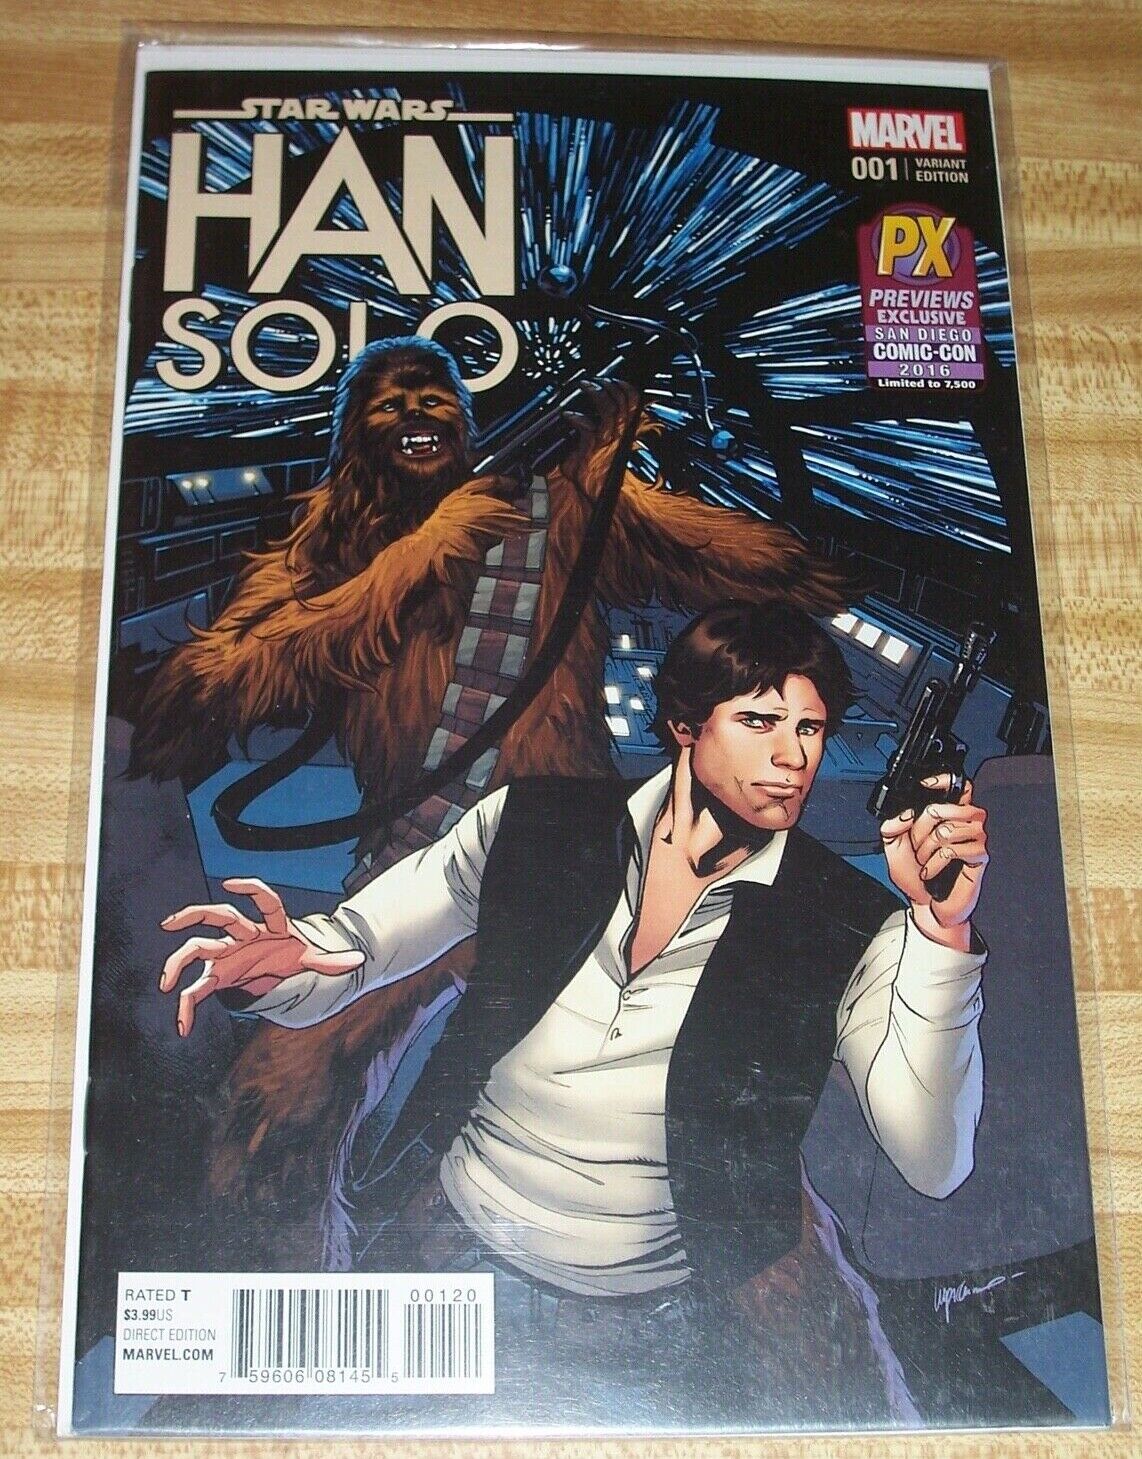 Han Solo #1 (2016) PX/SDCC 2016 Exclusive Emanuela Lupacchino Variant NM